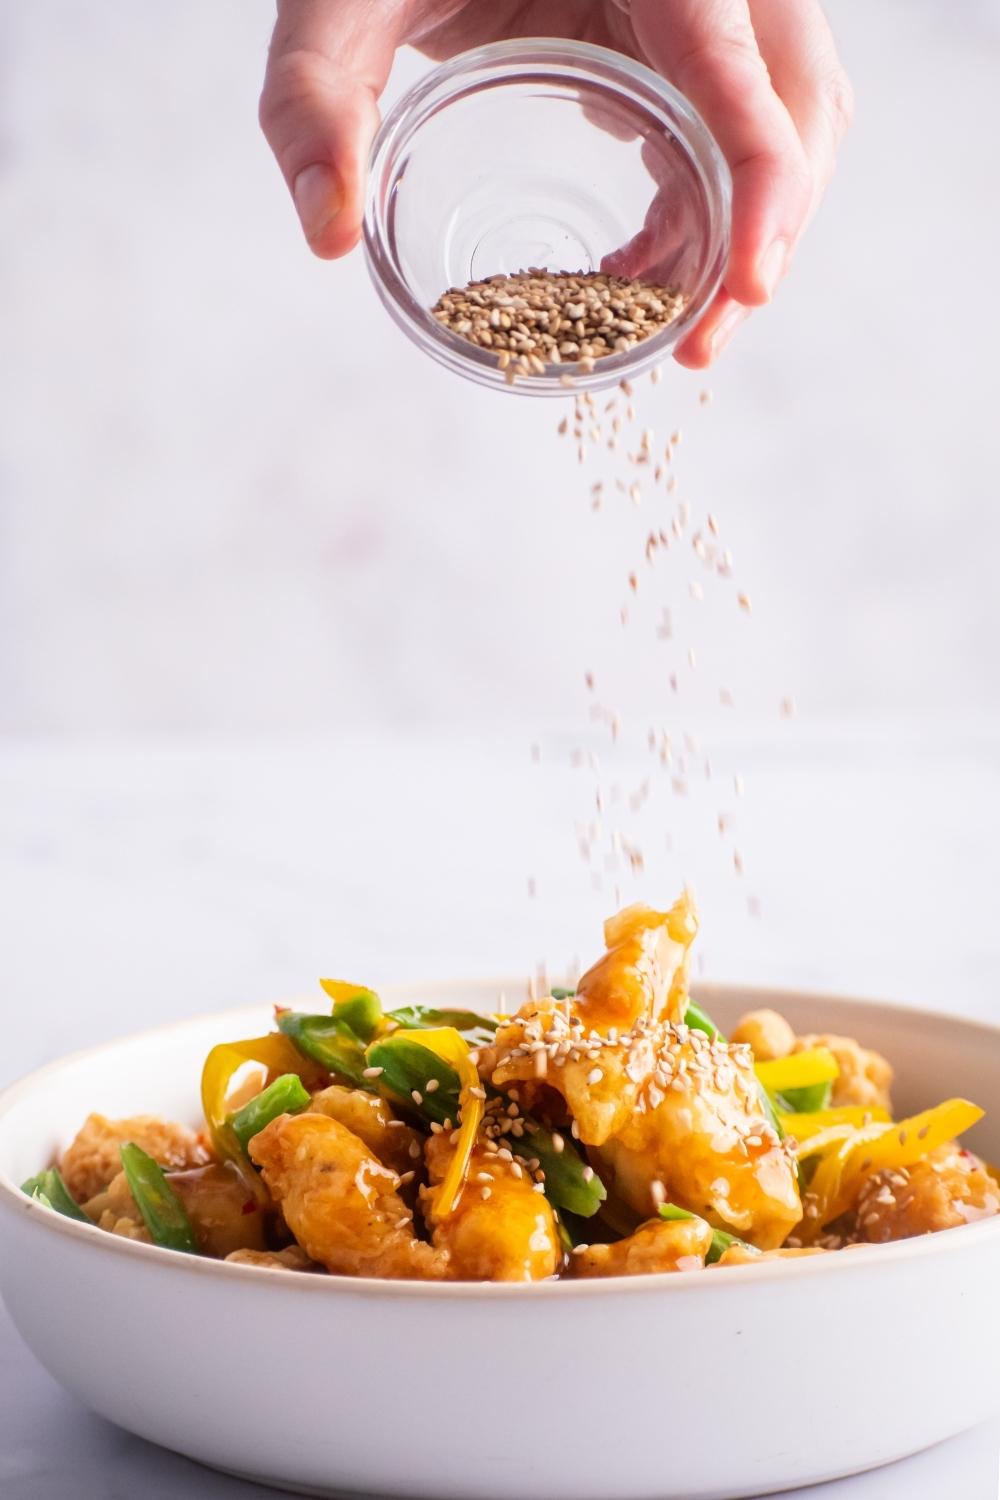 Hand sprinkling sesame seeds on top of honey sesame chicken, green beans, and yellow bell peppers in a white bowl.